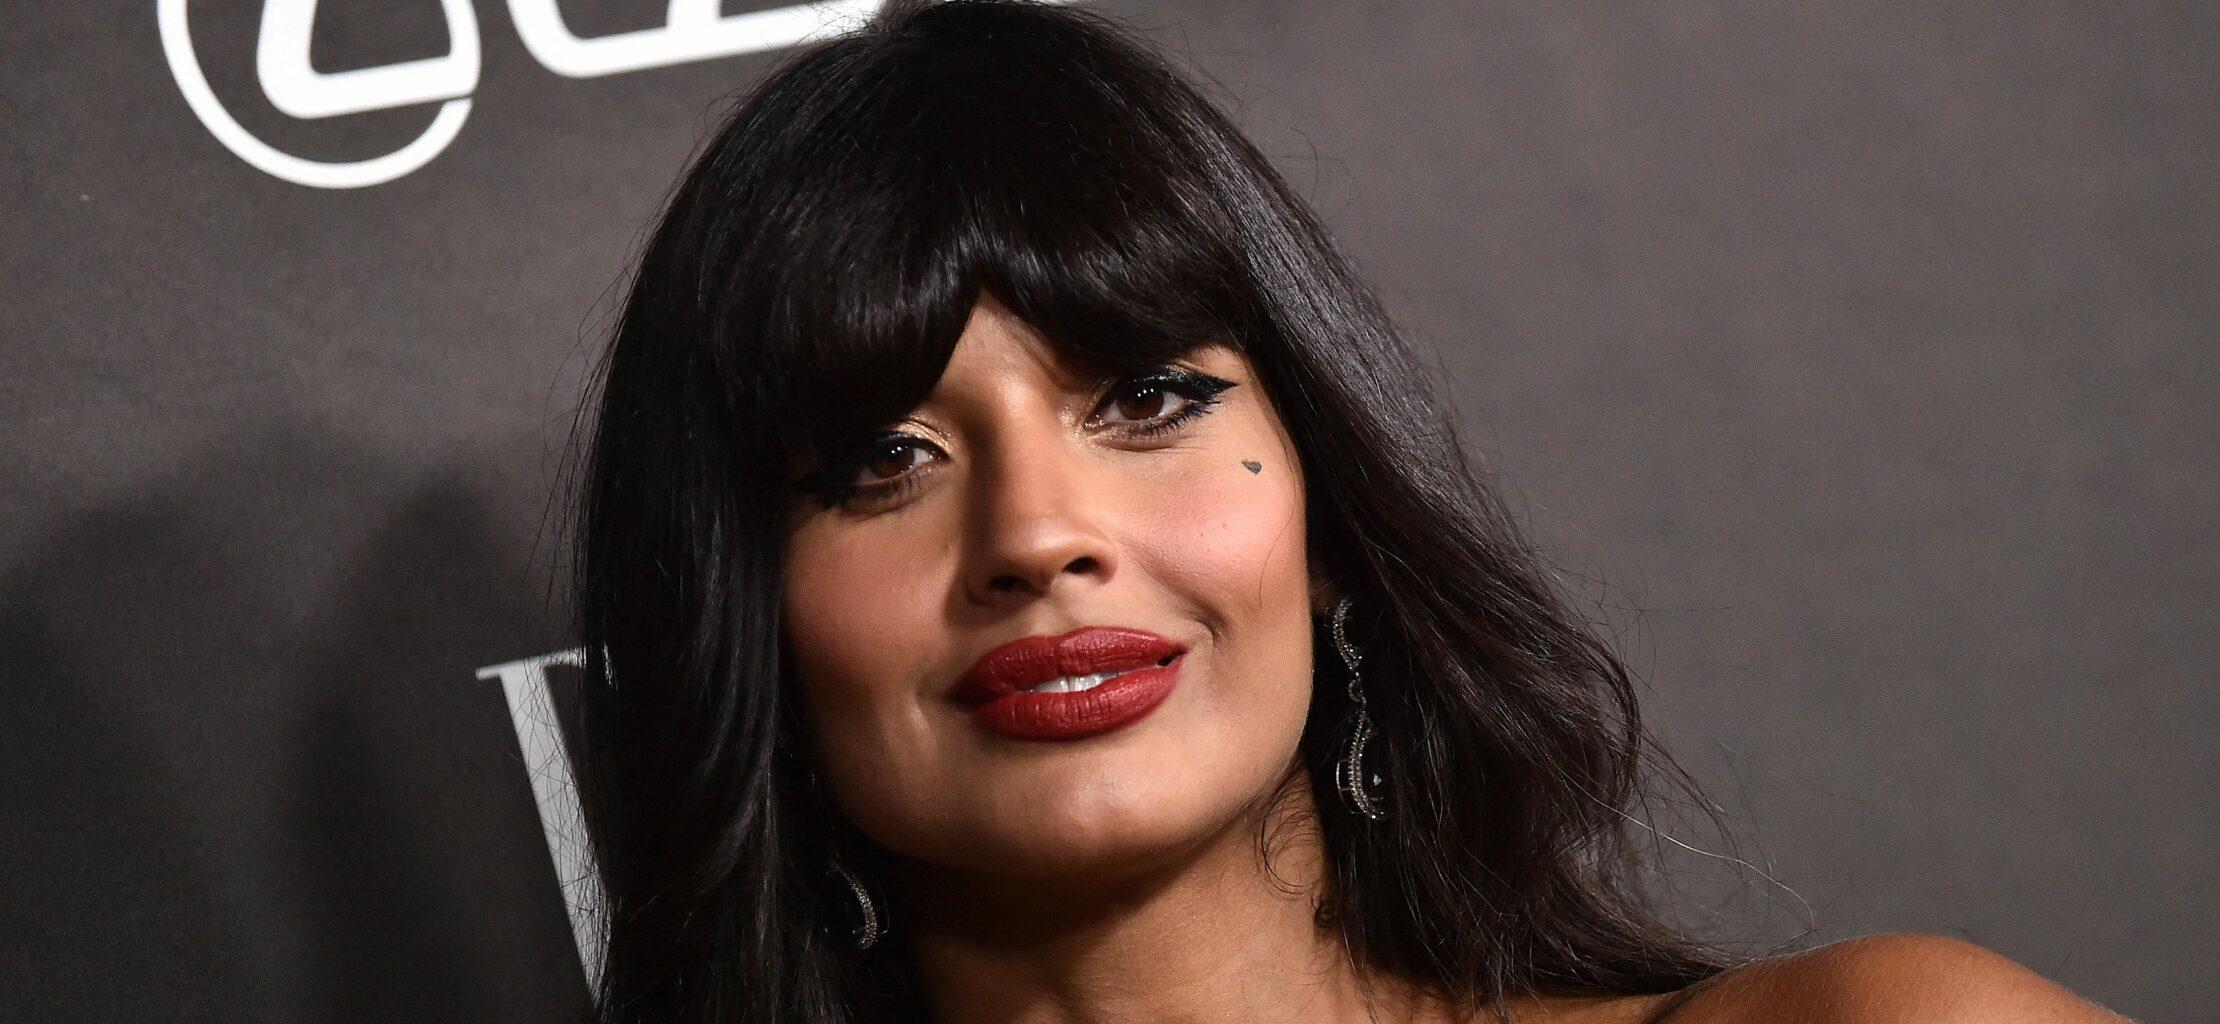 Jameela Jamil Reveals The Only Enhancement Surgery She Had Done